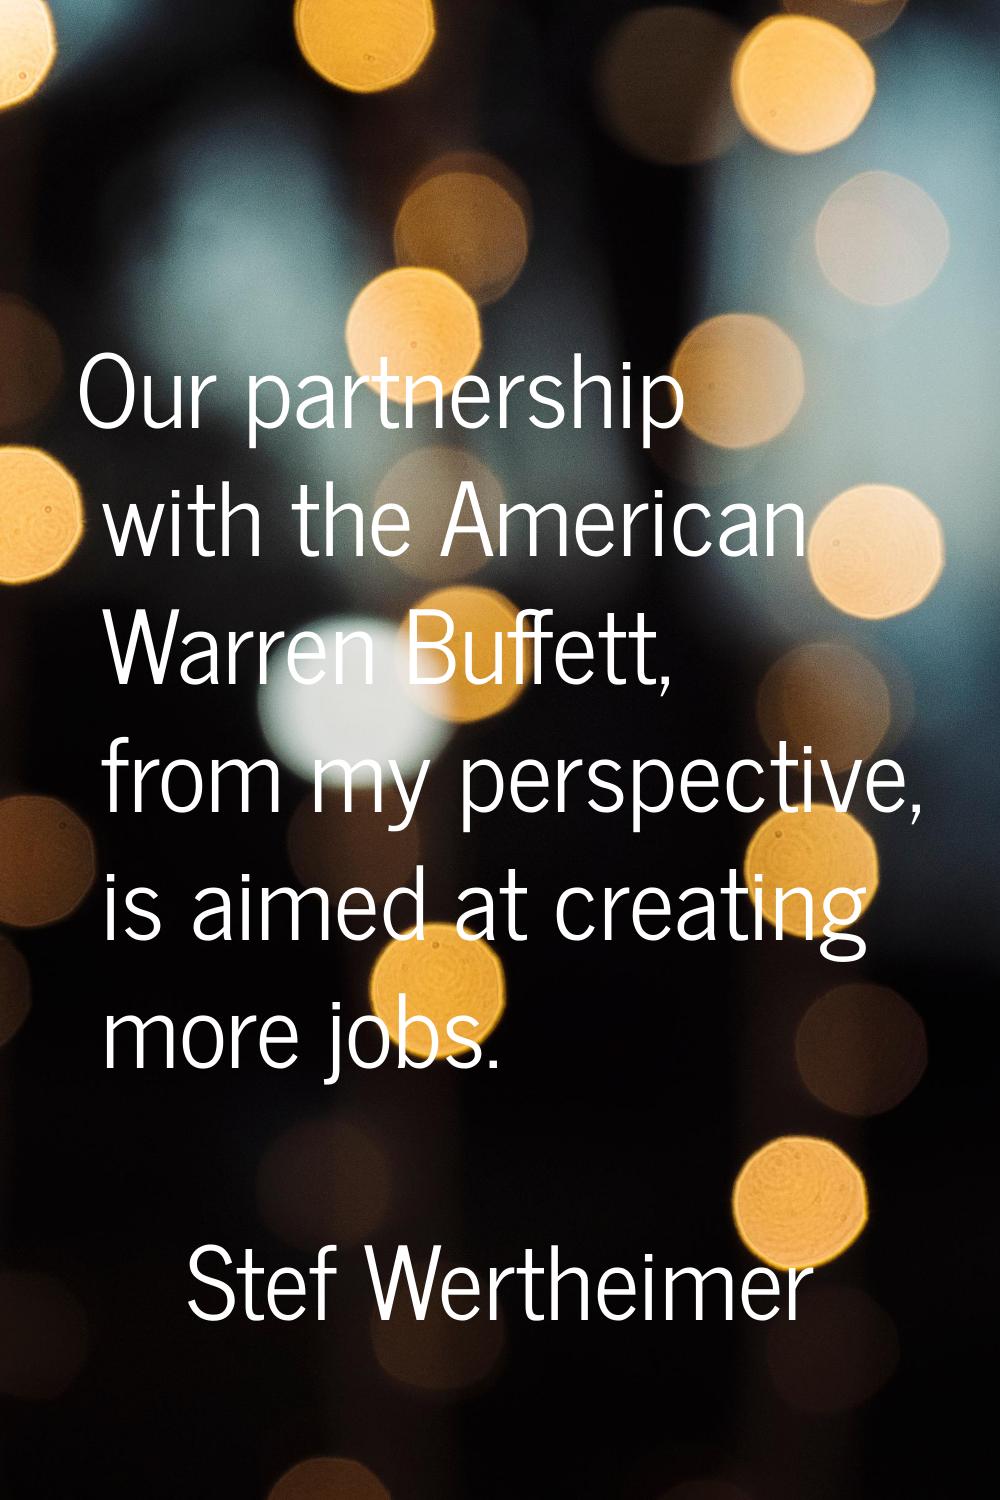 Our partnership with the American Warren Buffett, from my perspective, is aimed at creating more jo